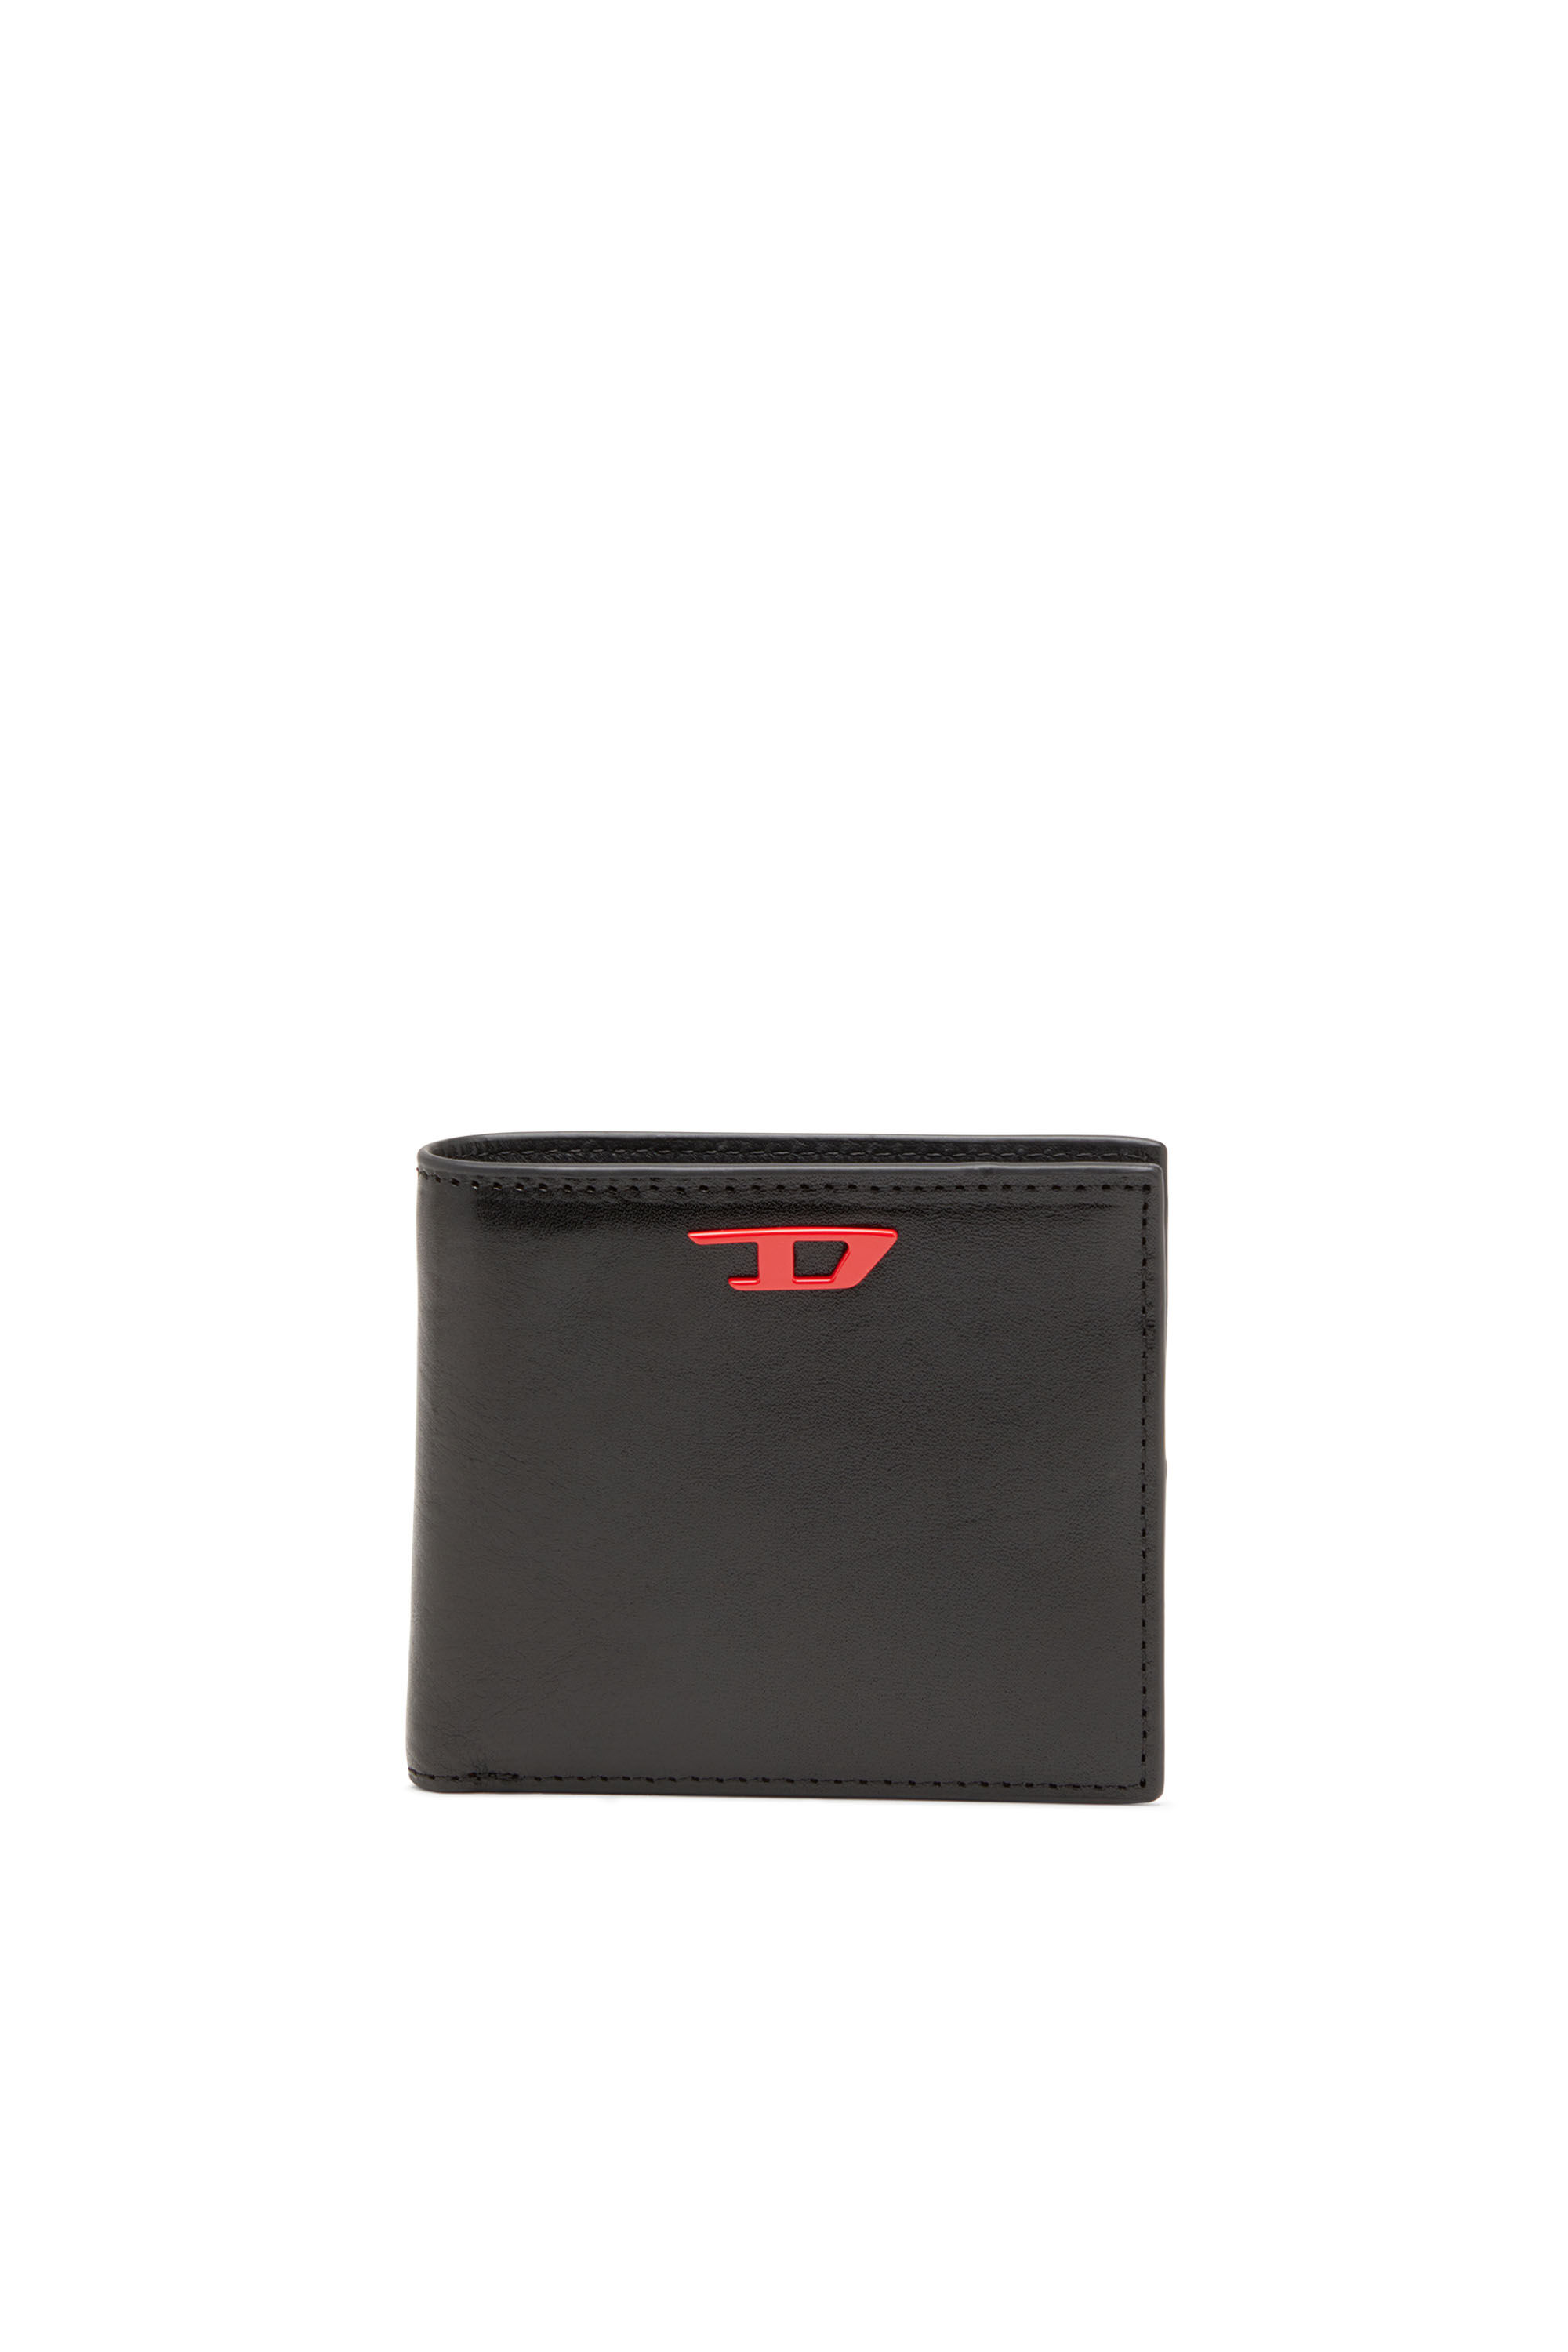 Diesel - RAVE BI-FOLD COIN S, Male Leather bi-fold wallet with red D plaque in ブラック - Image 1